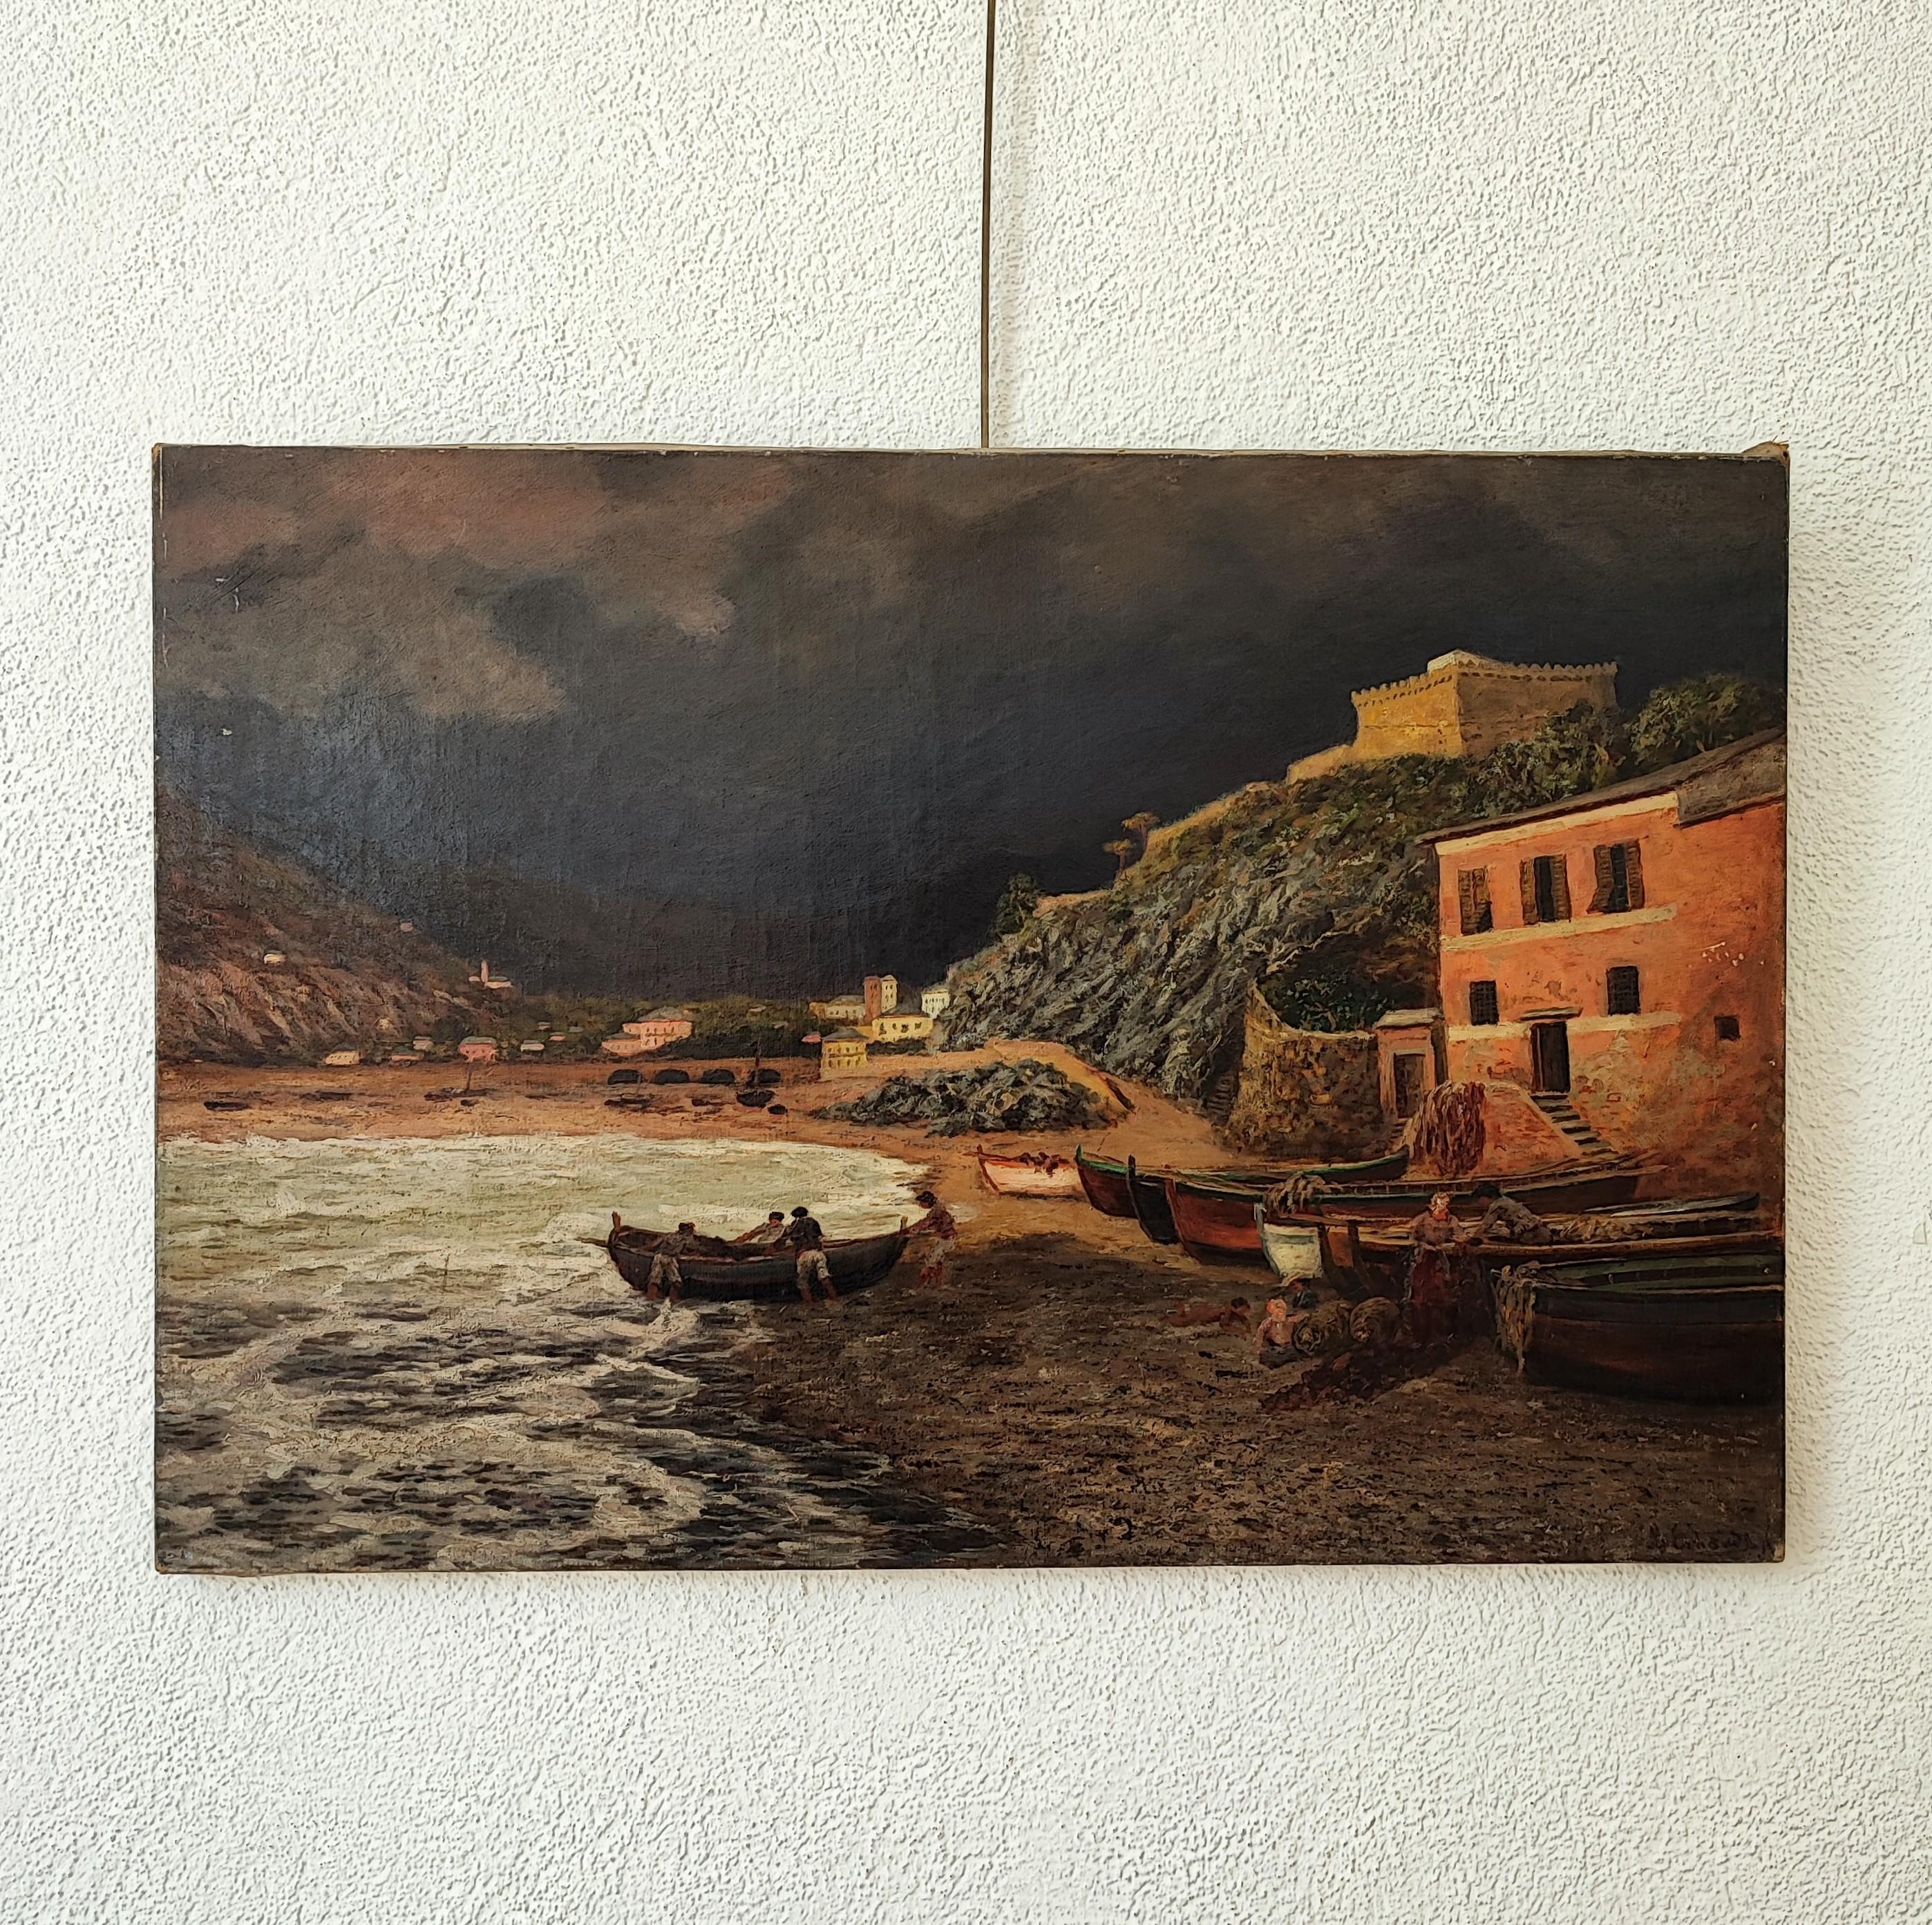 Landscape on the Italian coast - Painting by Unknown